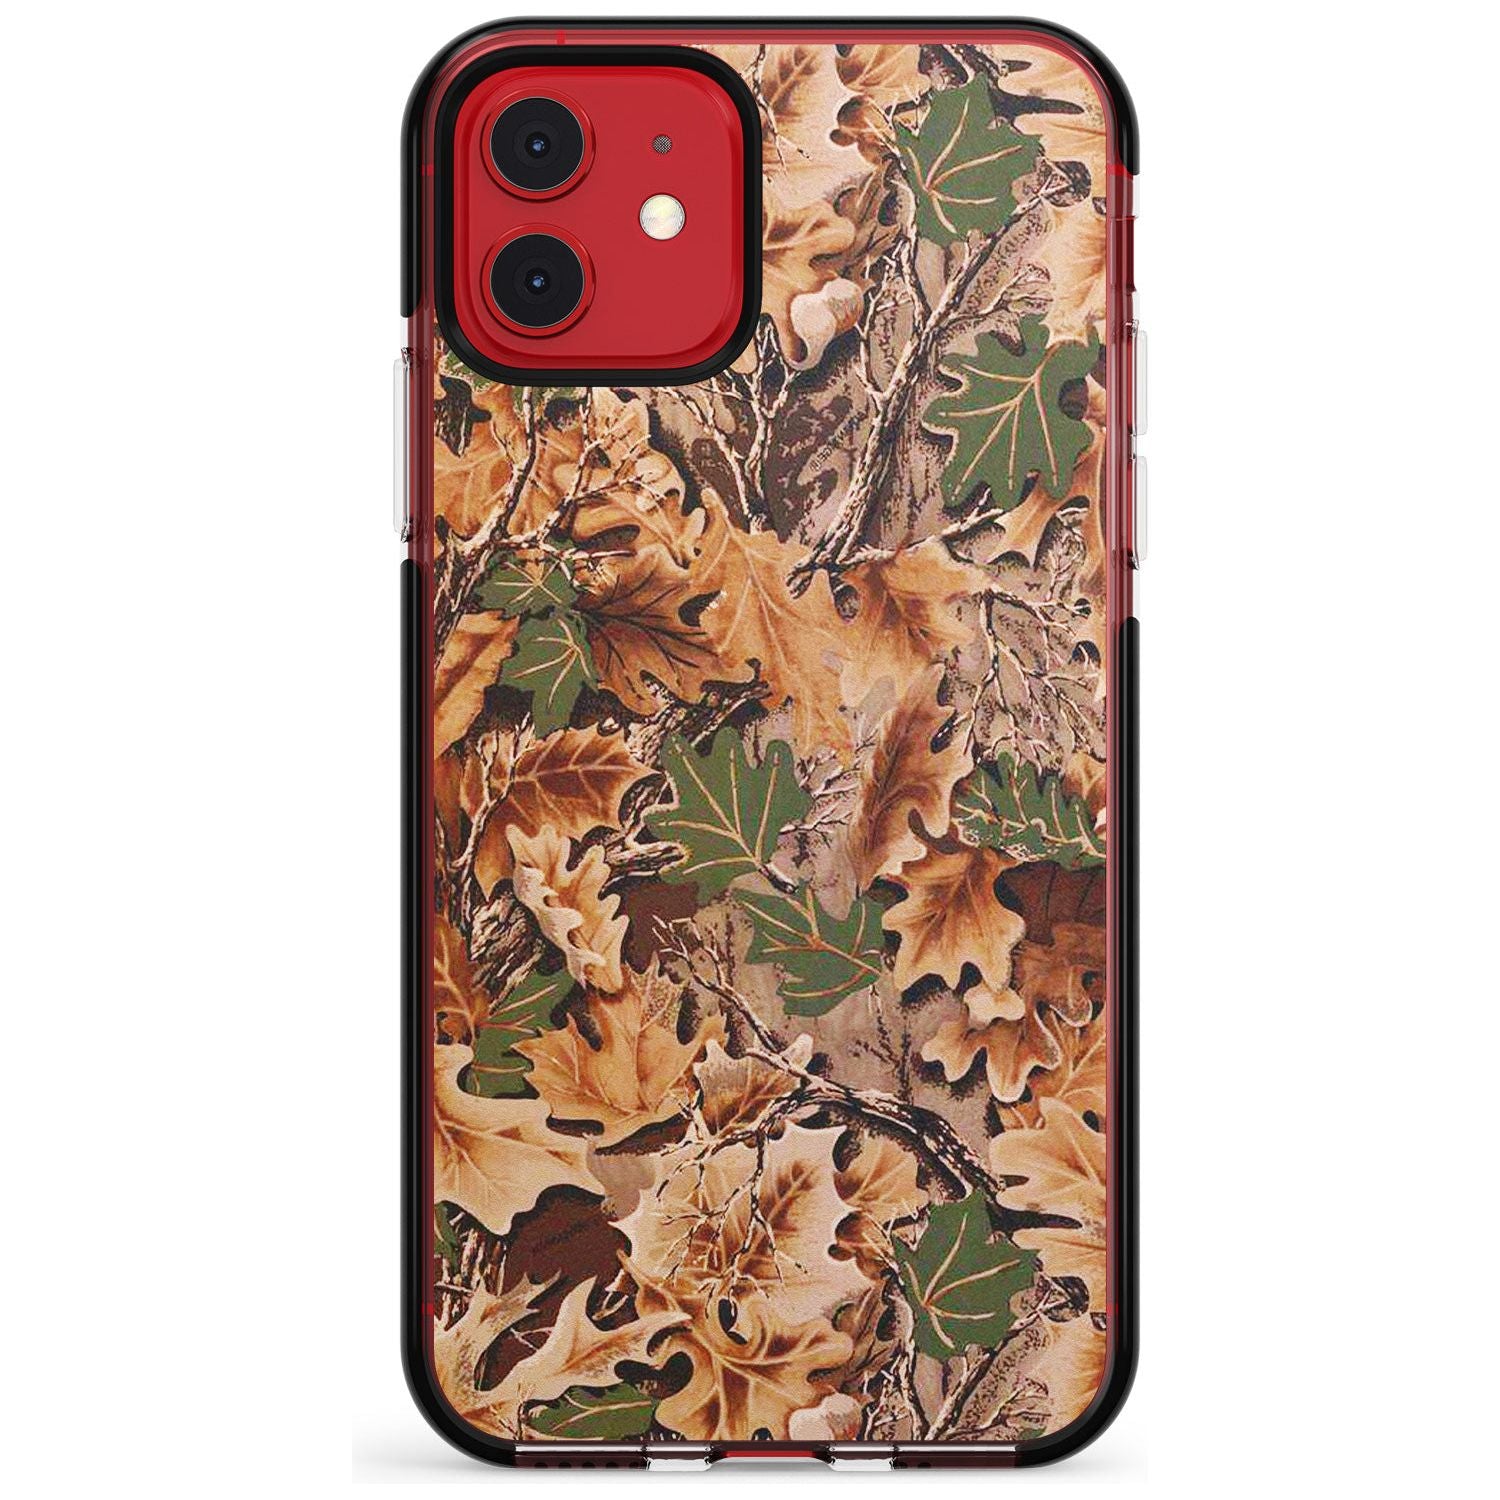 Leaves Camo Black Impact Phone Case for iPhone 11 Pro Max